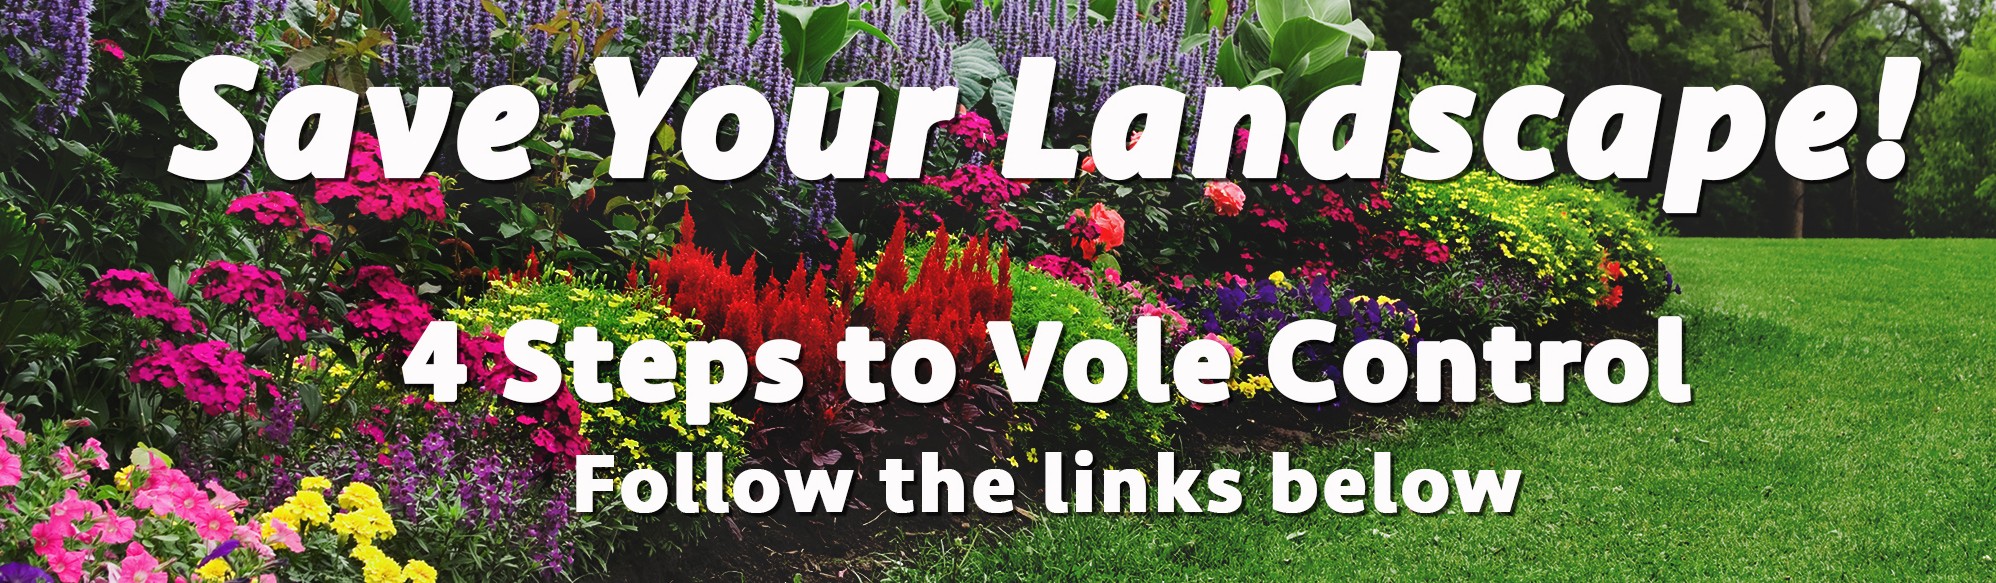 Get Rid of Voles - Four Steps to Vole Control